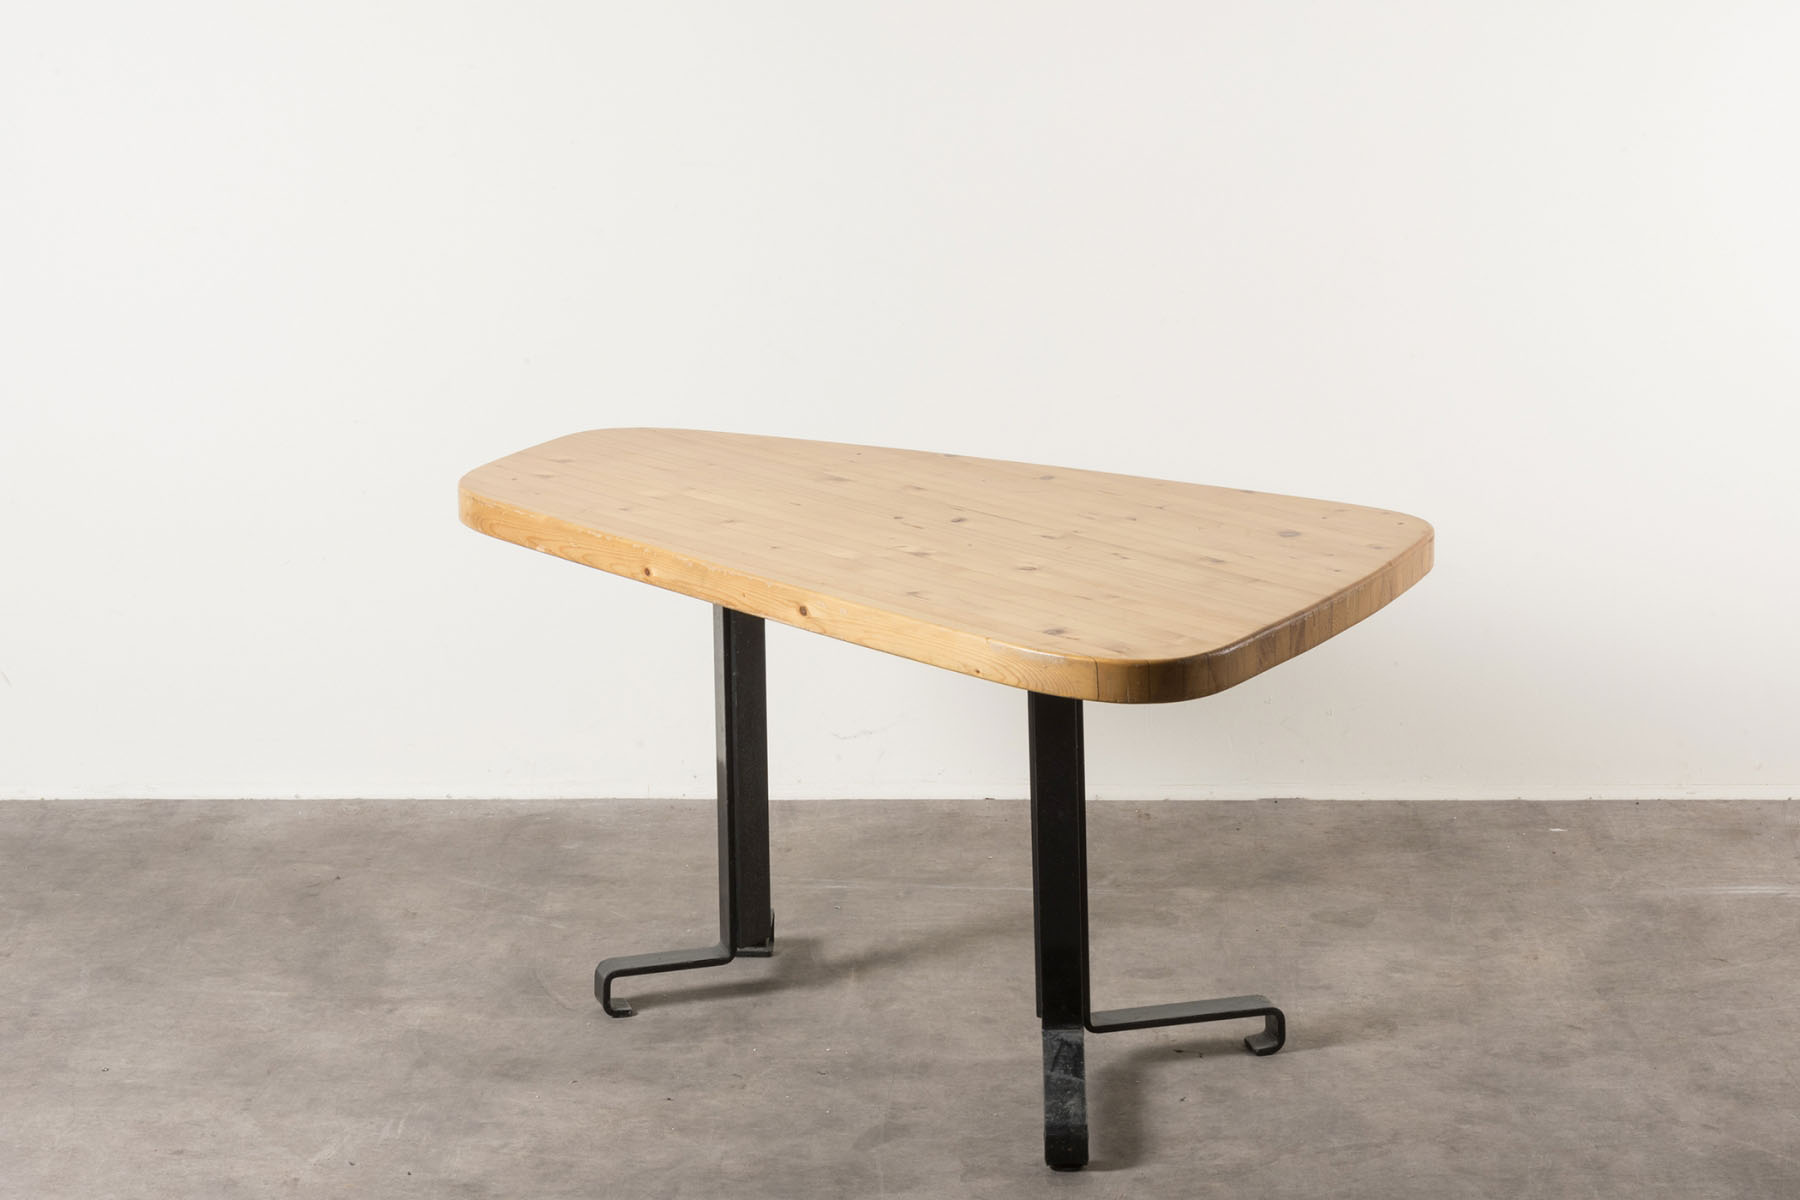 Table Charlotte Perriand pic-1